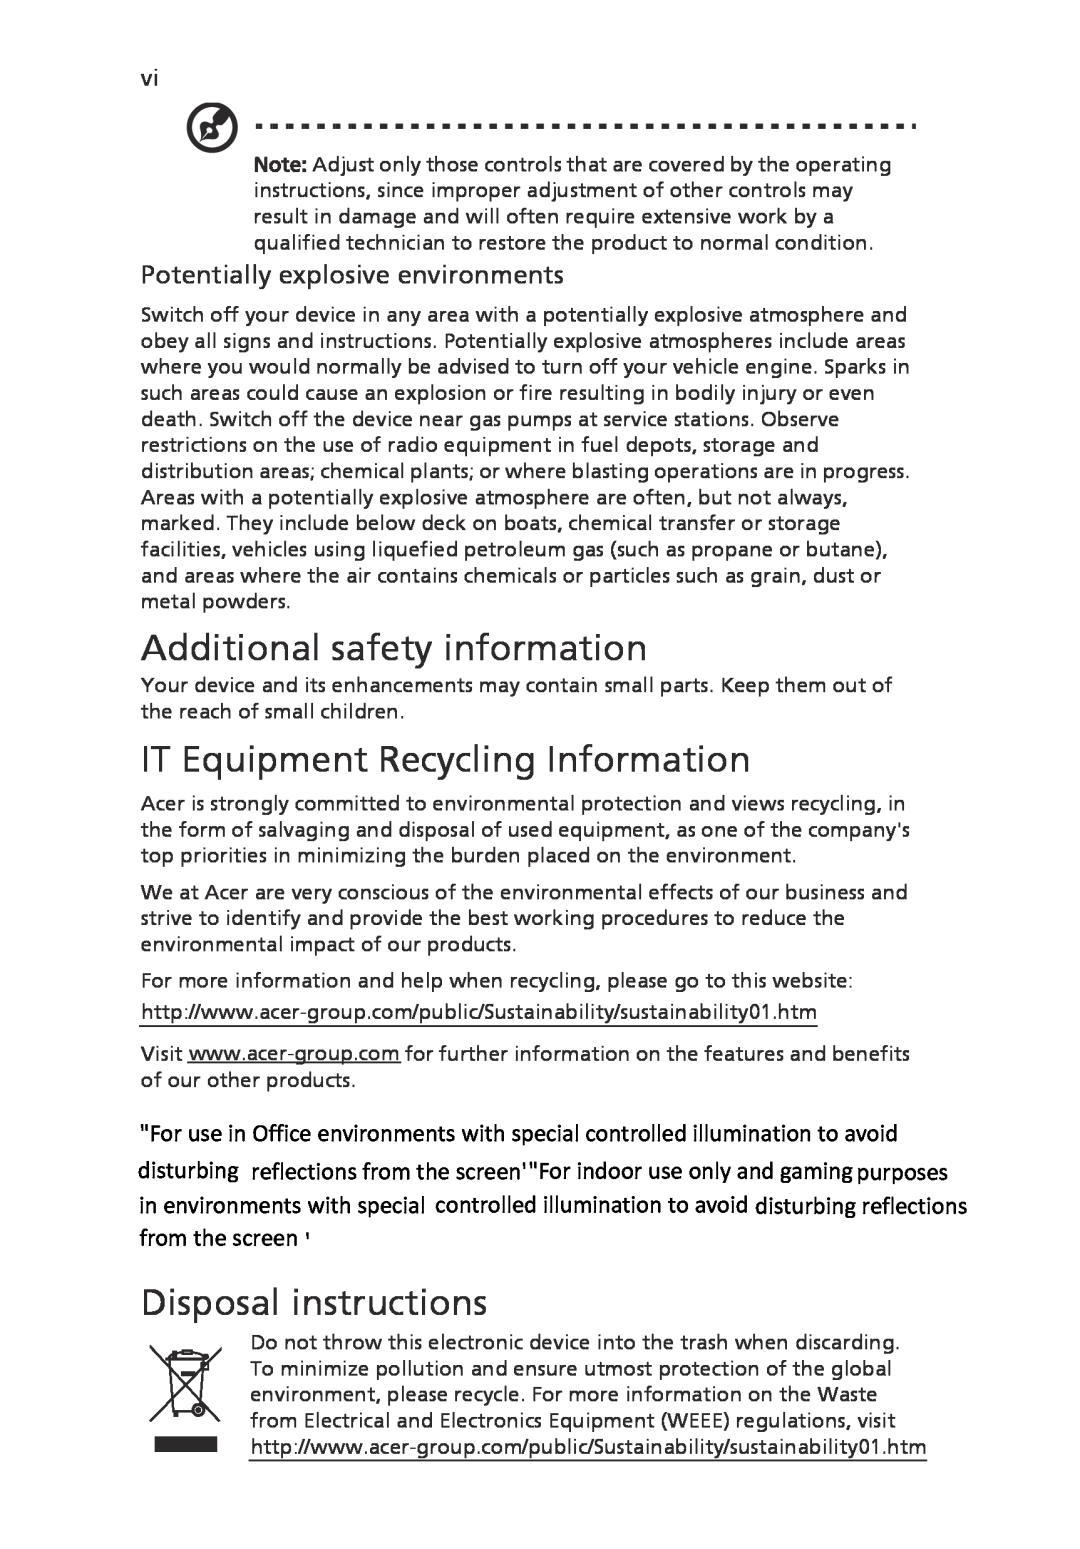 Acer UM.VH6AA.003, UM.WH6AA.002 Additional safety information, IT Equipment Recycling Information, Disposal instructions 